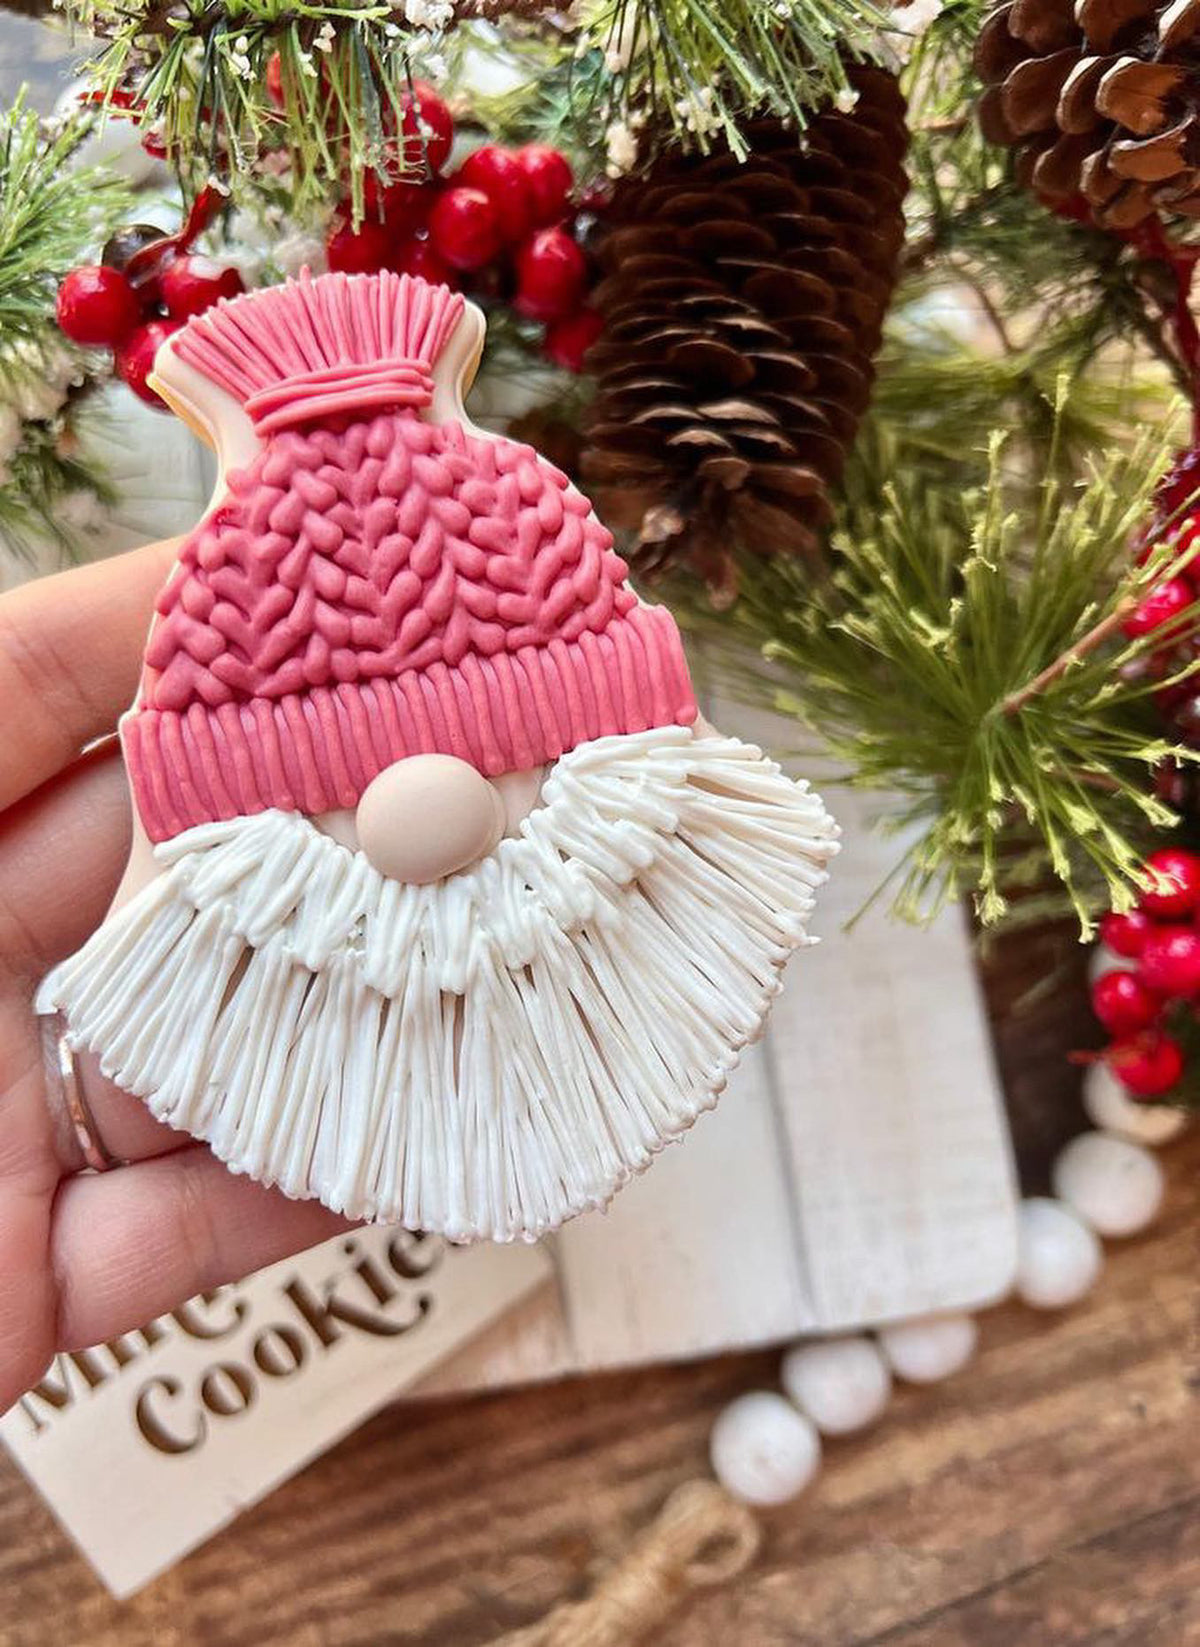 Macrame Gnome Cookie Cutter by MinnieCakes